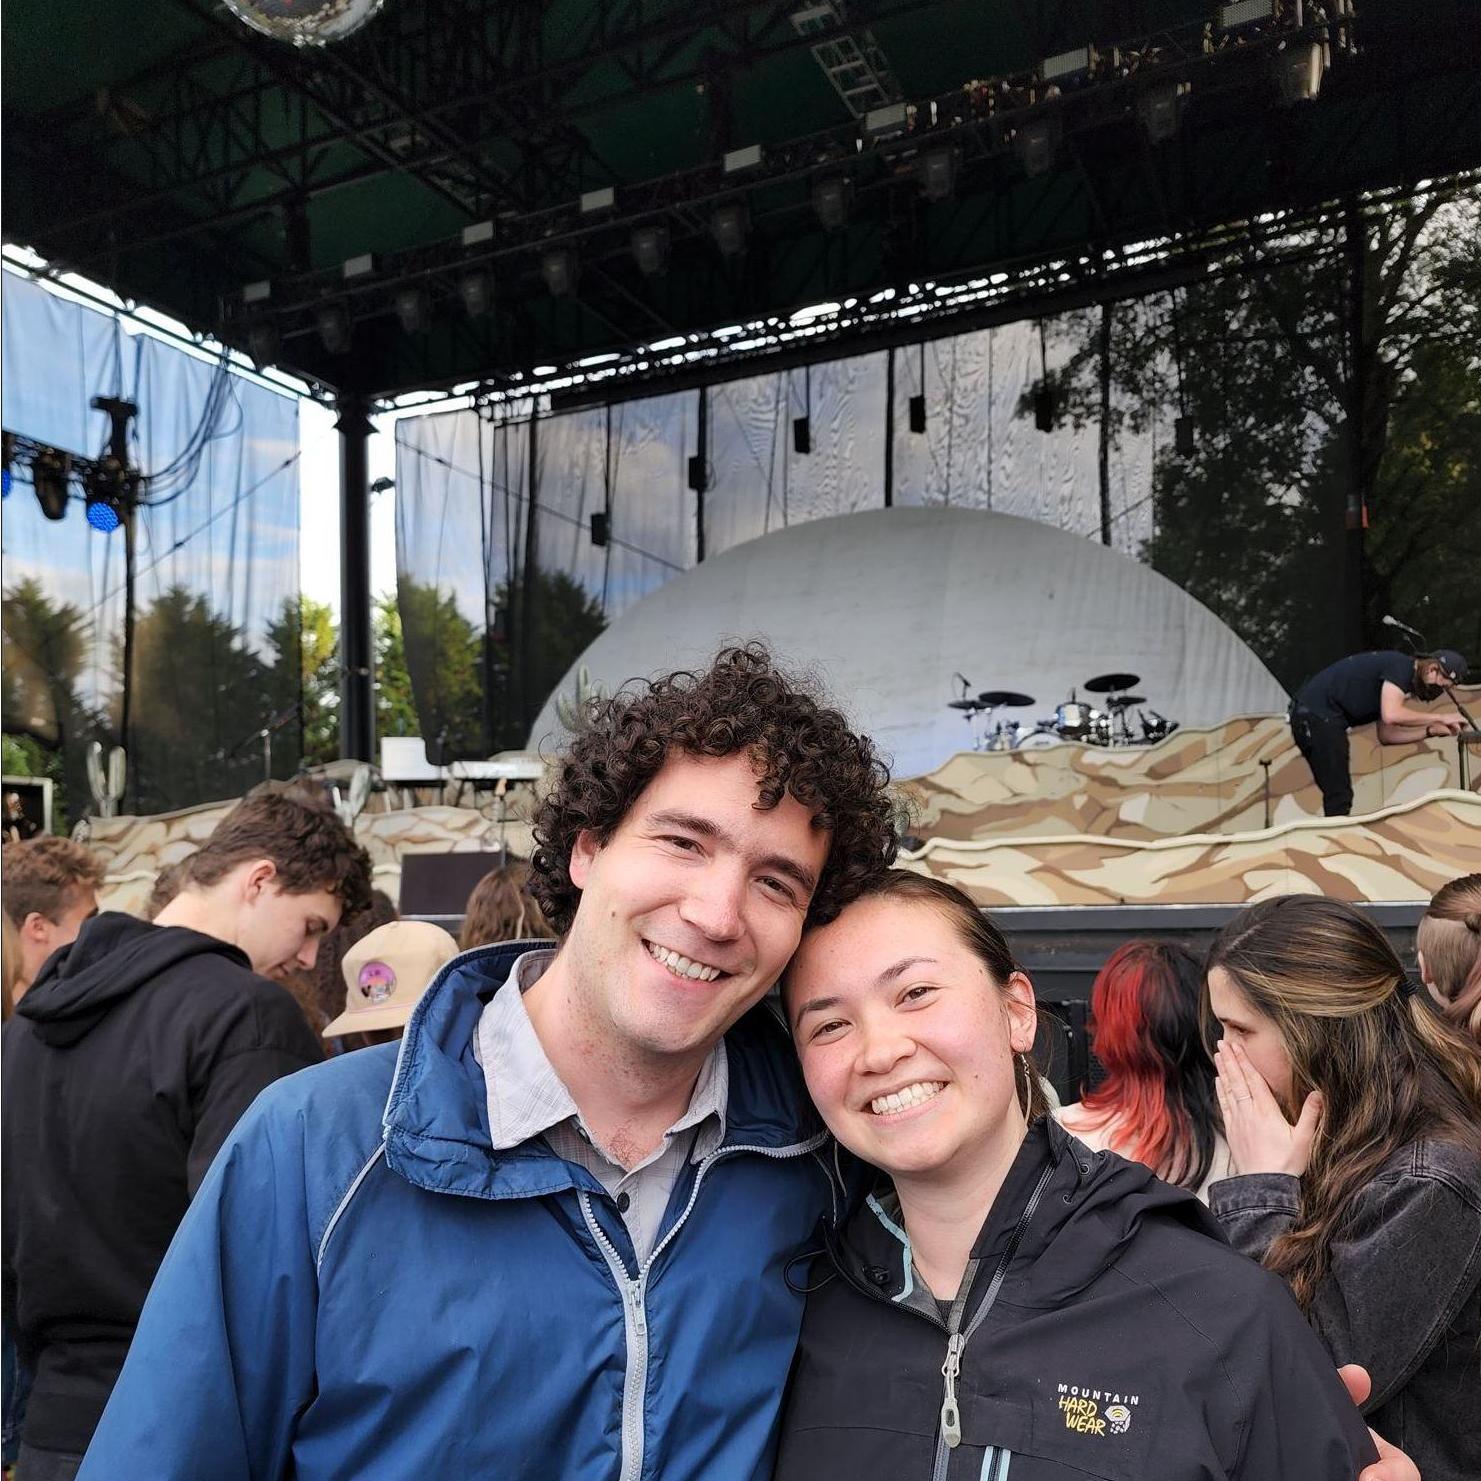 Our first concert! Lord Huron - May 2022